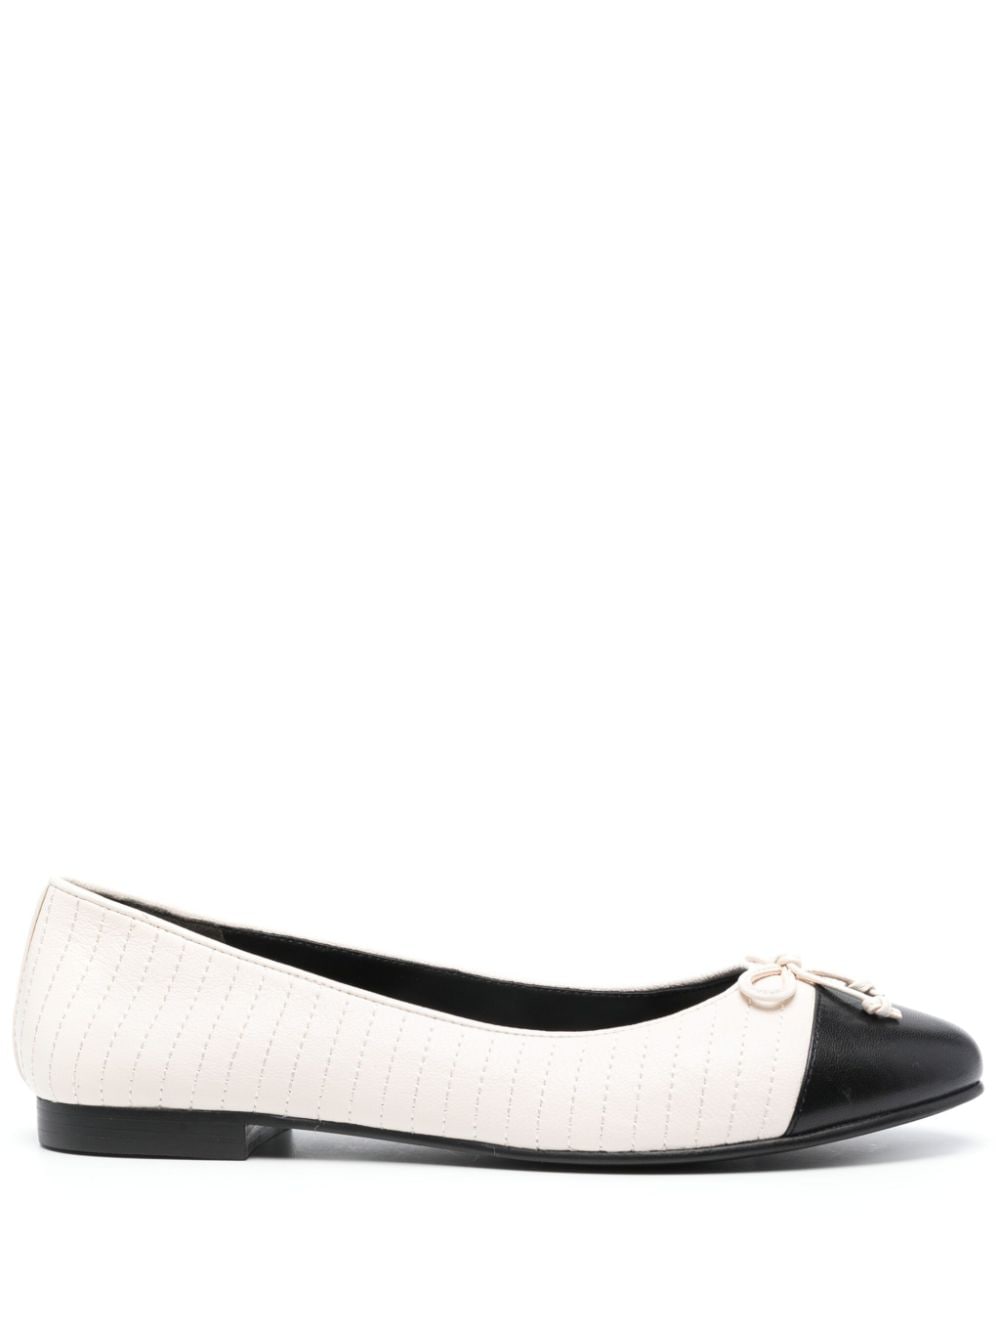 Tory Burch embellished ballerina shoes - White von Tory Burch